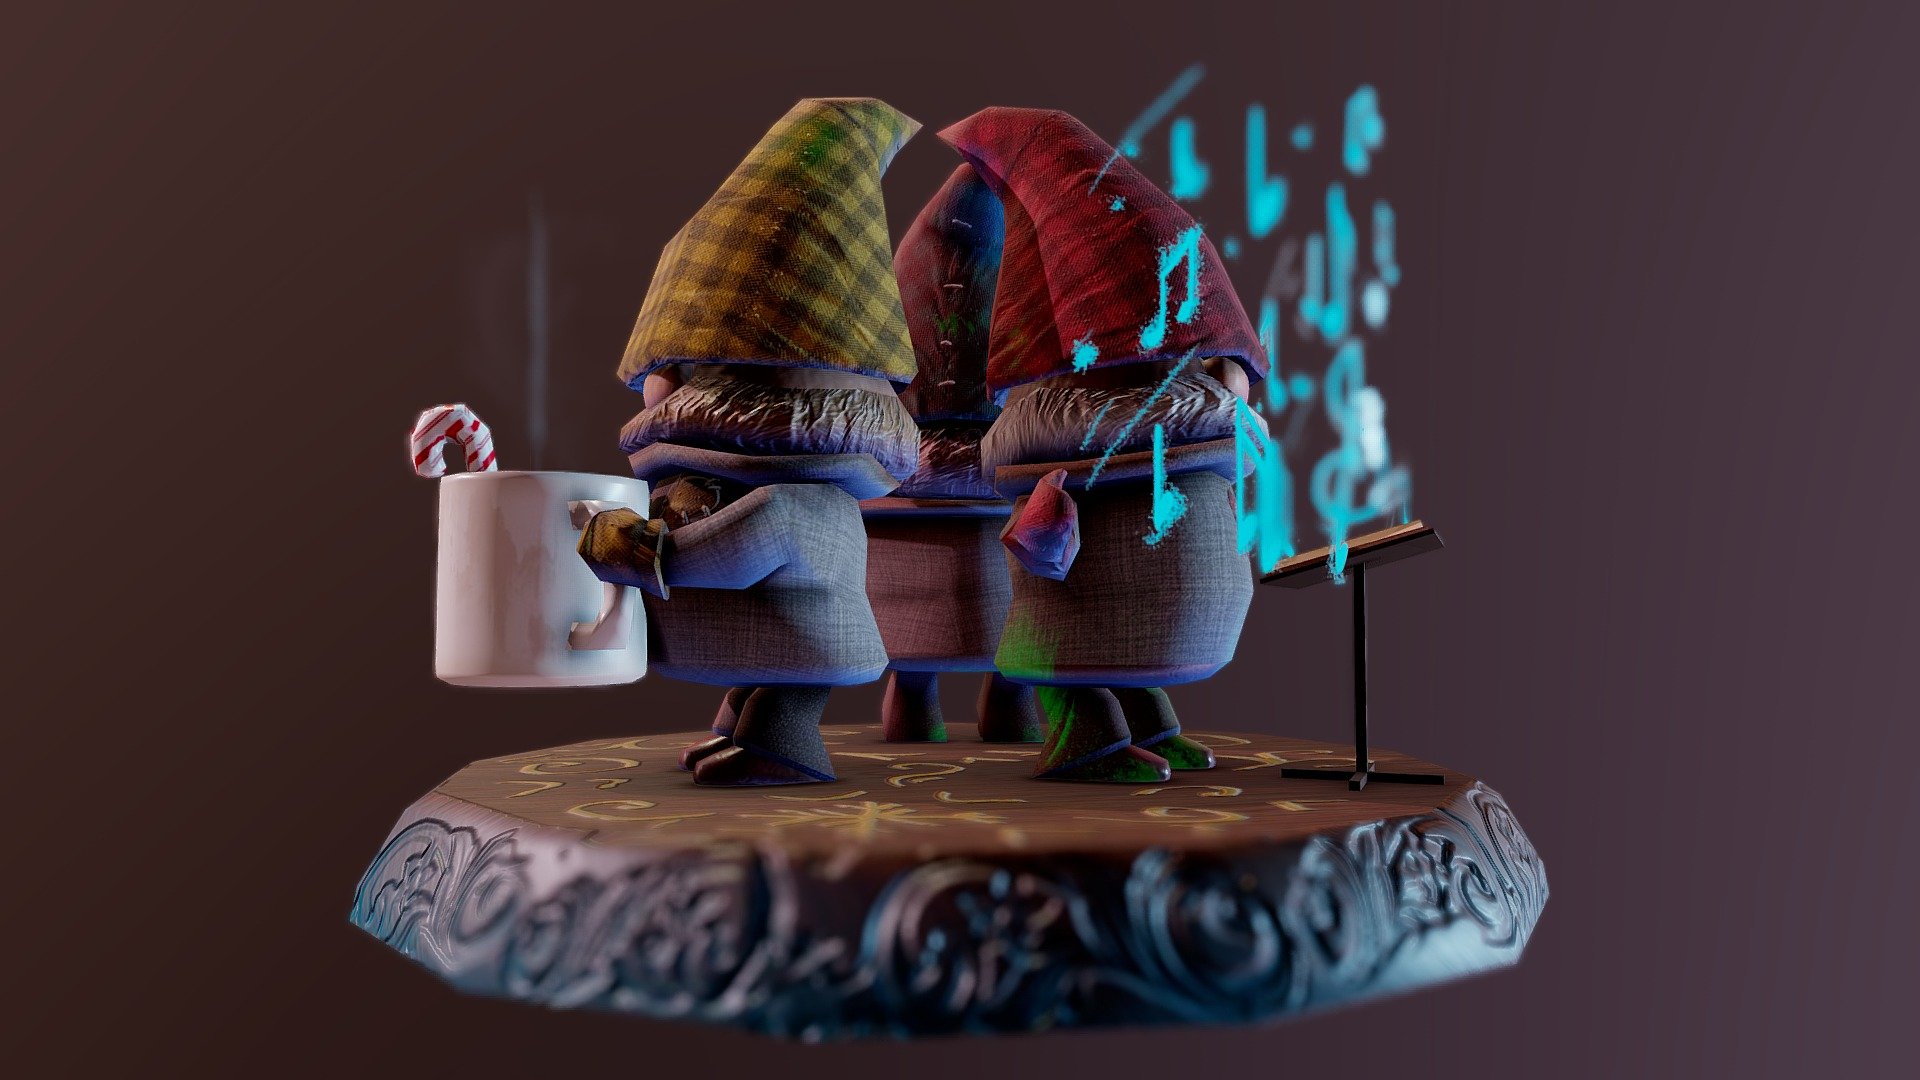 A simple model of three elves/gnomes bundled up for the holidays. All models were created using Maya and textured in Substance Painter 3d model